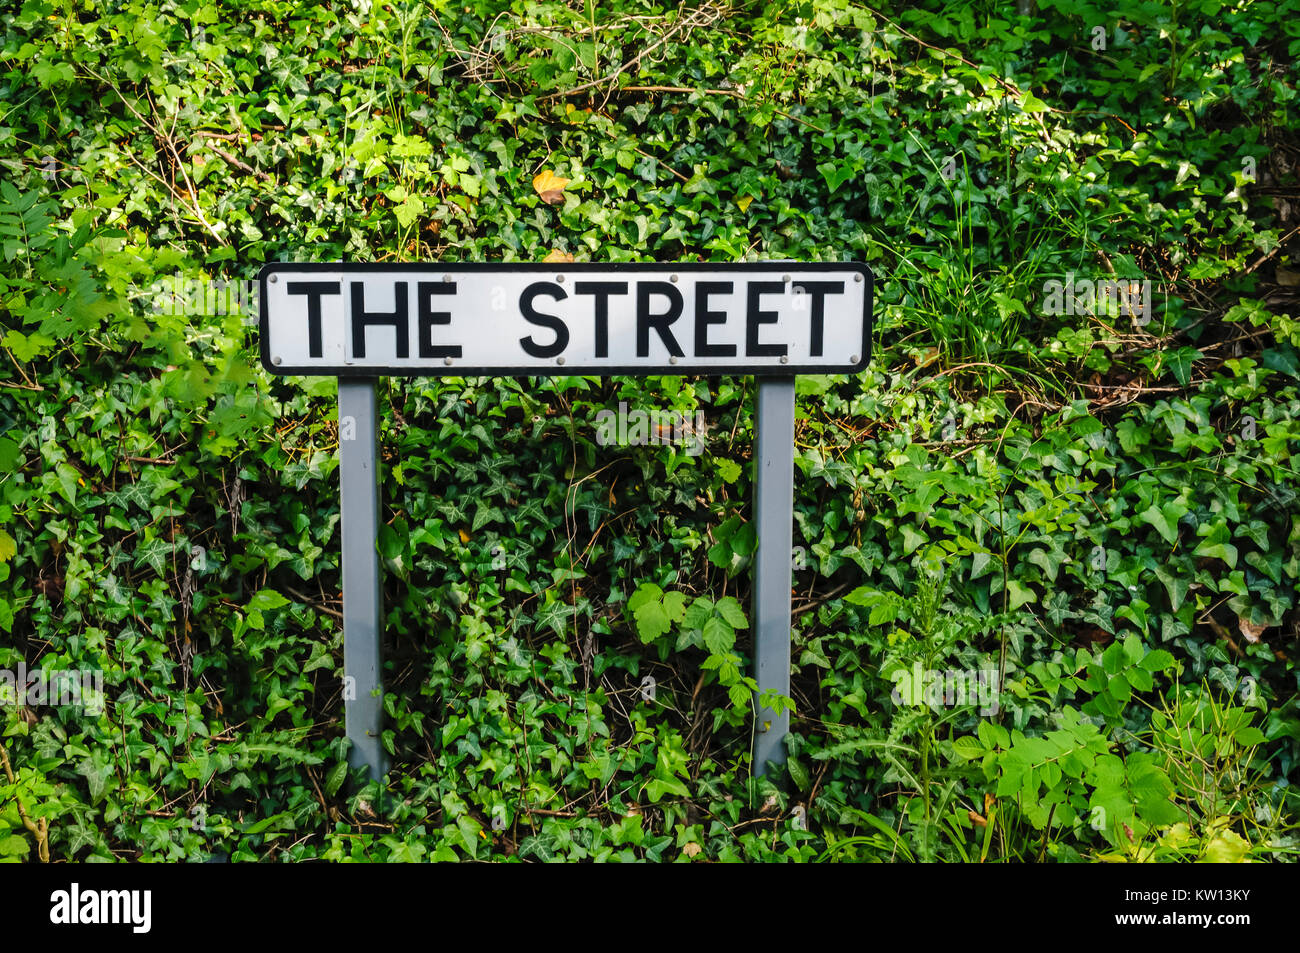 Street sign for a street called 'The Street' Stock Photo